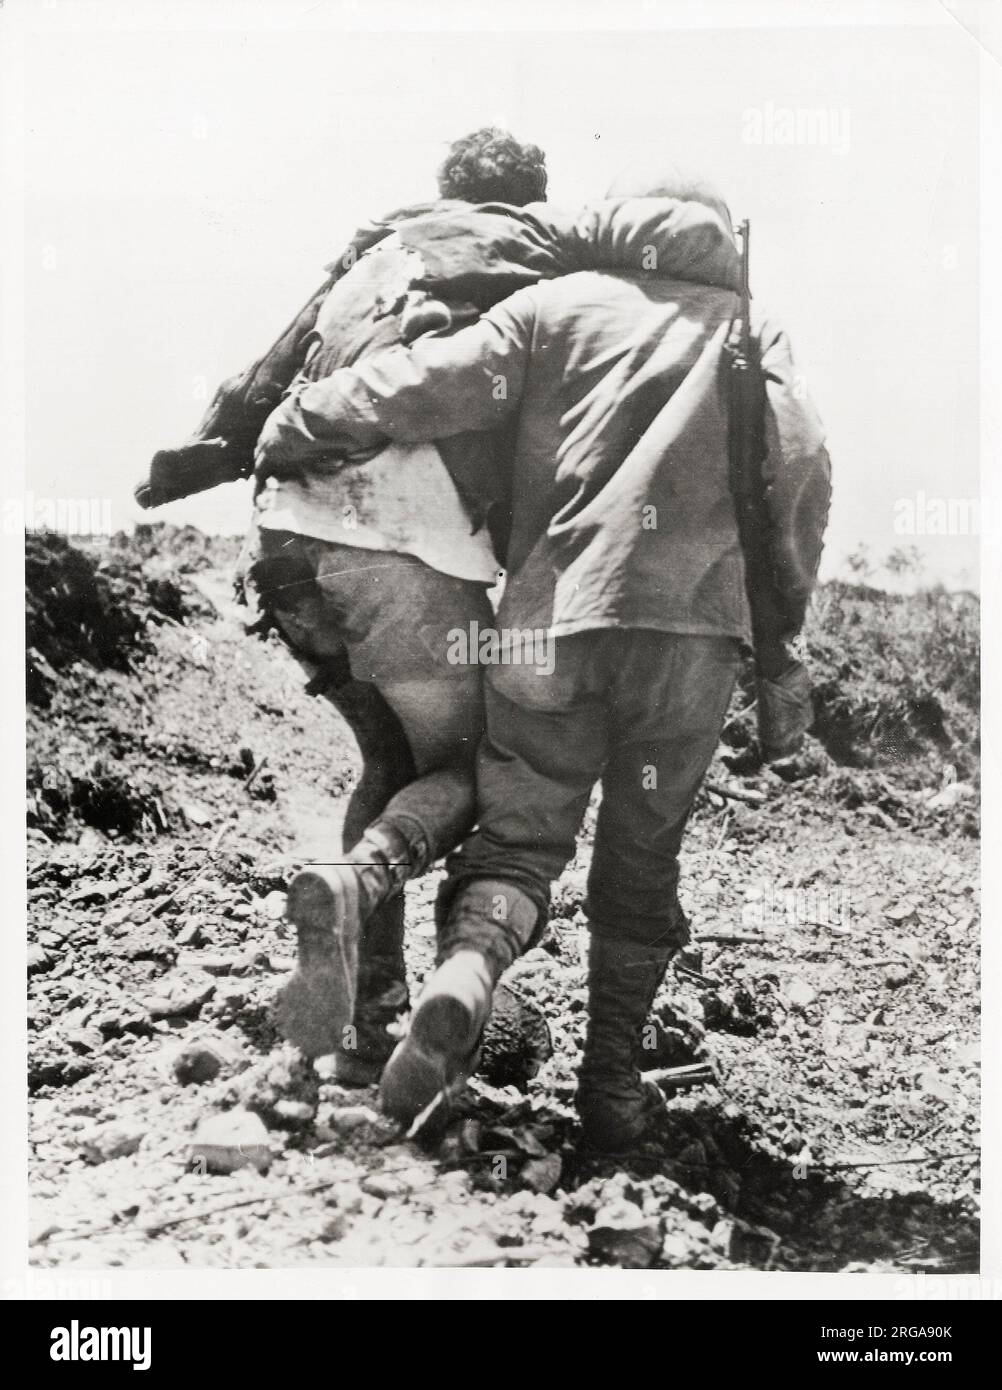 World War II vintage photograph - US soldier with clothes partially blown of is helped towards the rear by comrade. Stock Photo